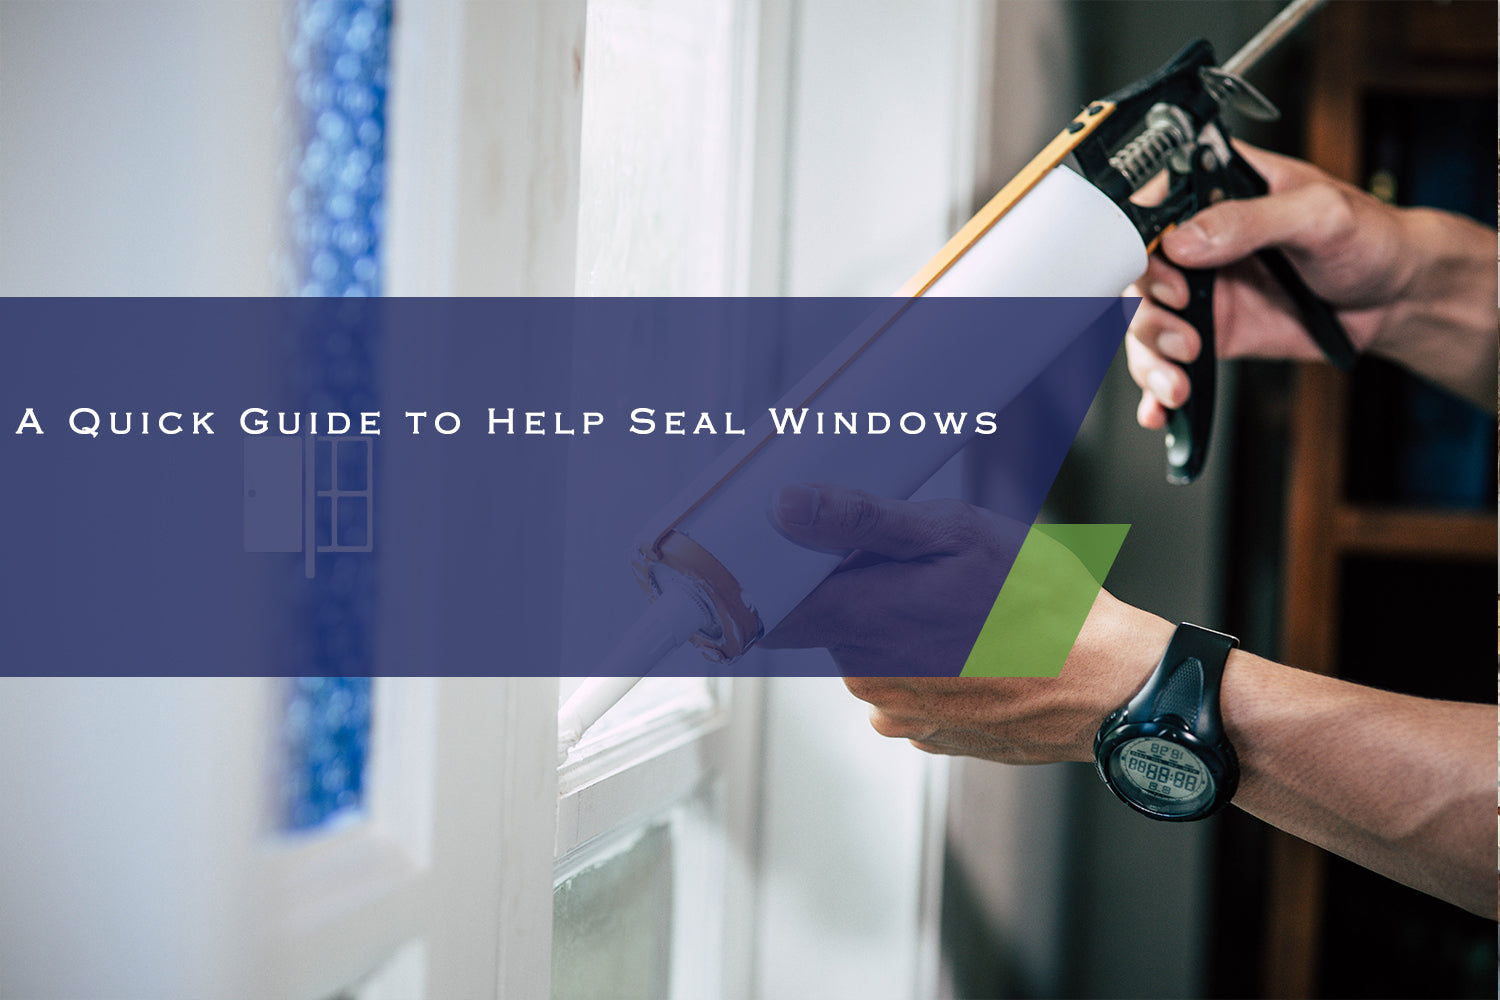 A Quick Guide to Help Seal Windows